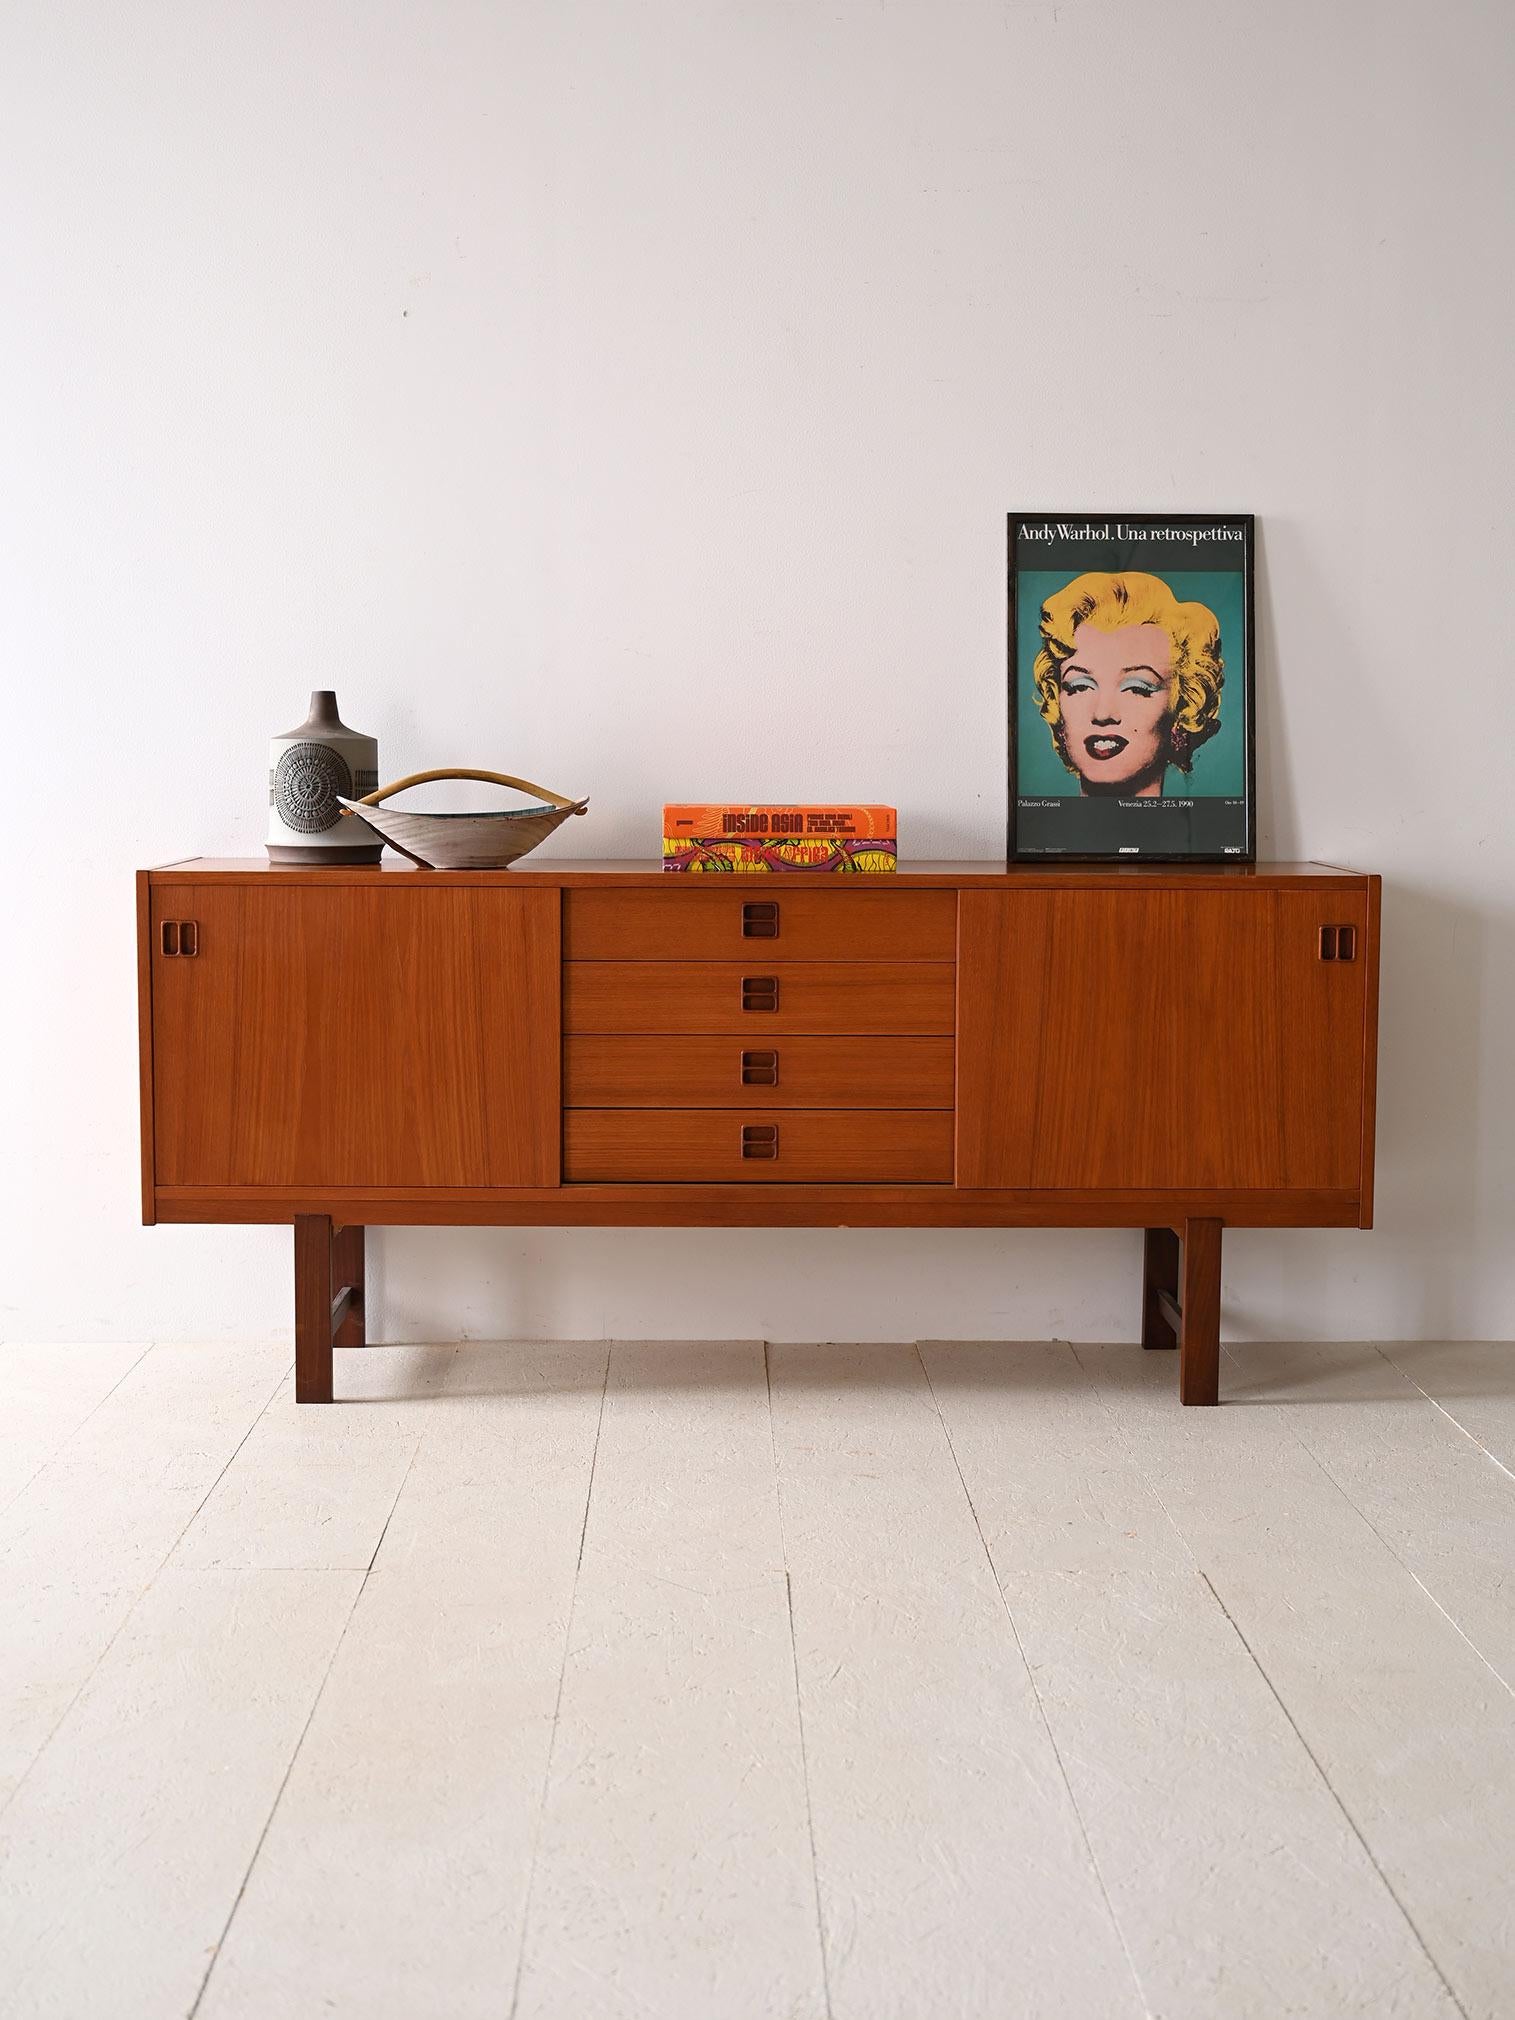 1960s teak sideboard with sliding doors and 4 drawers. 

This elegant piece of furniture perfectly embodies the minimalist and rationalist aesthetics of the period with its clean, linear structure. Made of teak wood, the sideboard exudes warmth and